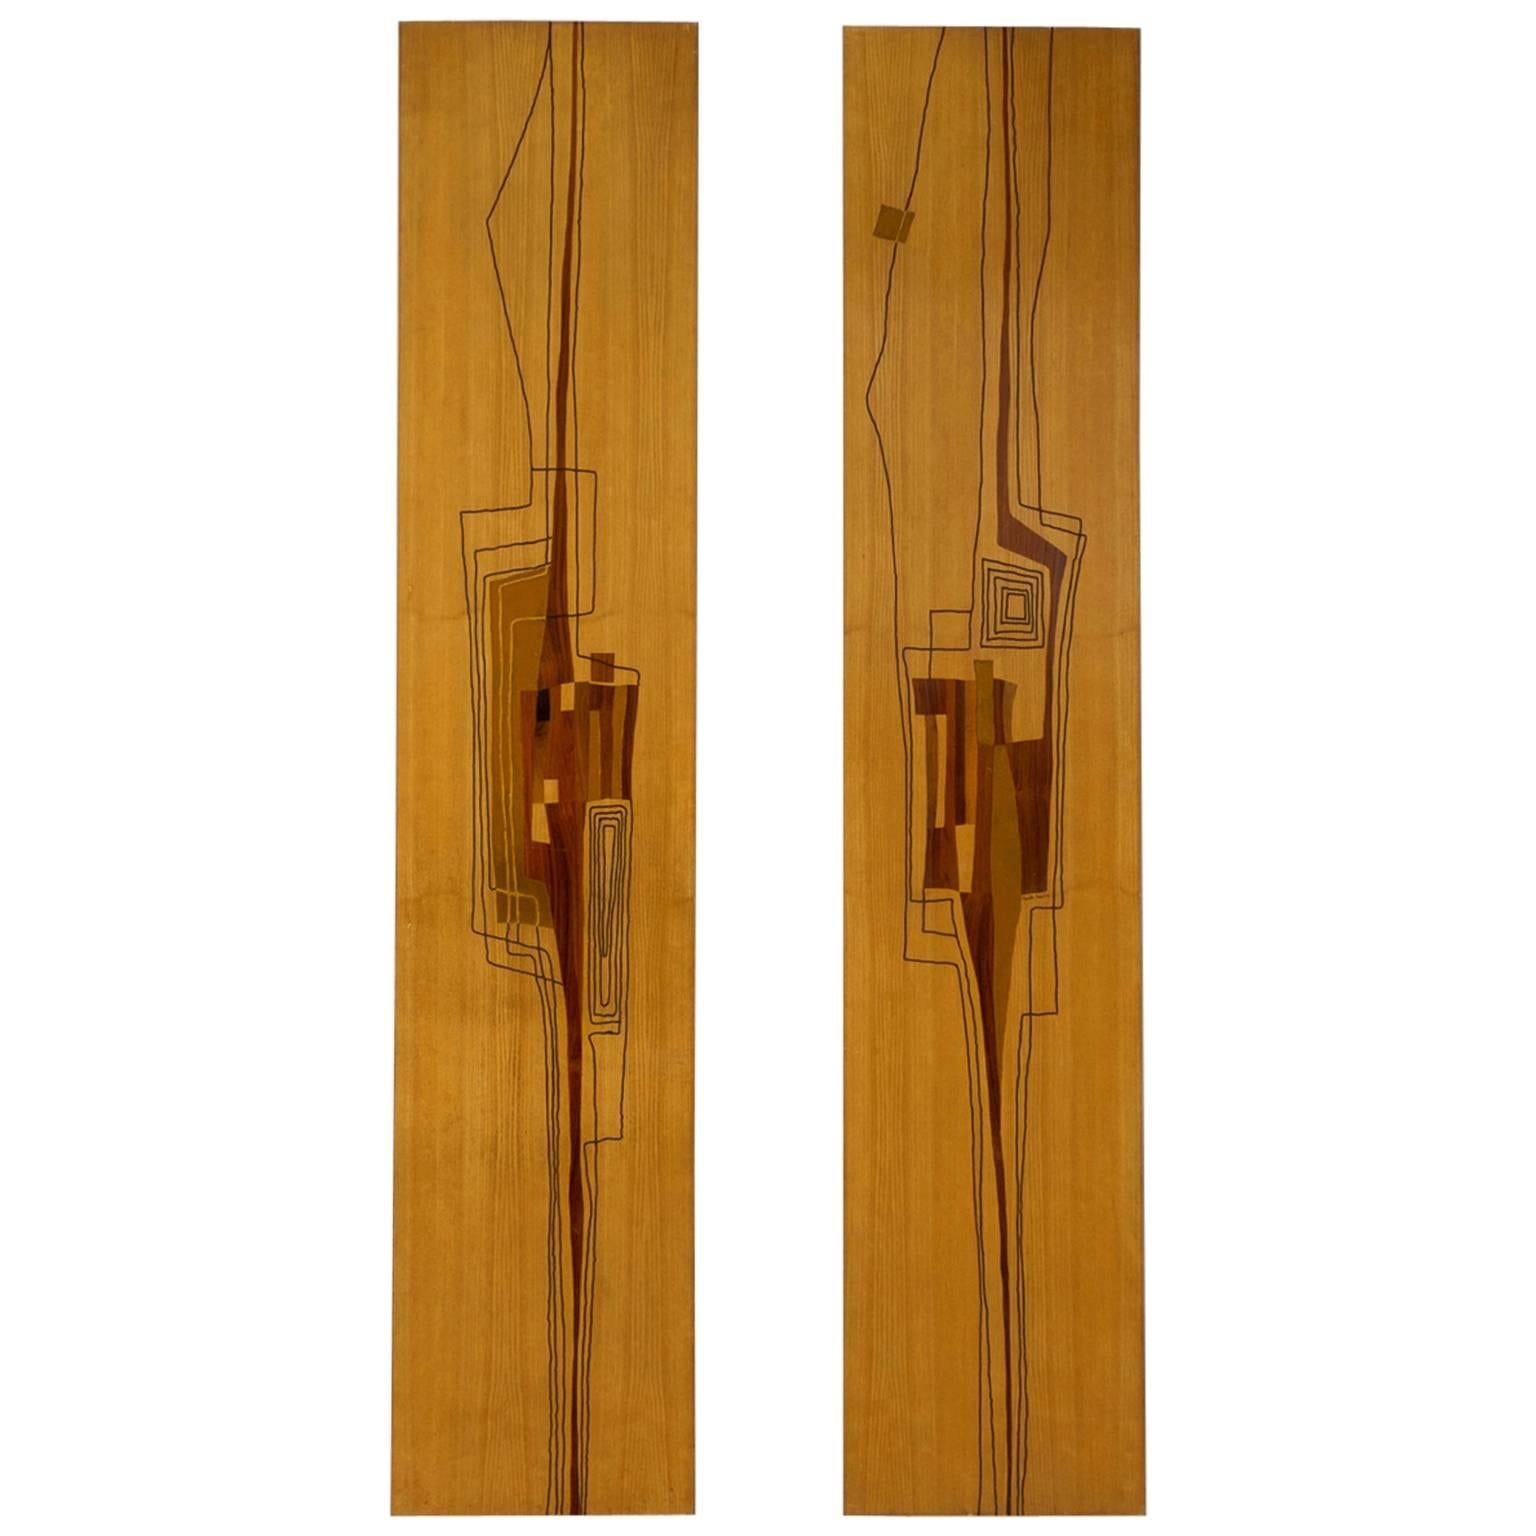 Marcello Siard Set of Two Wooden Wall Panels 